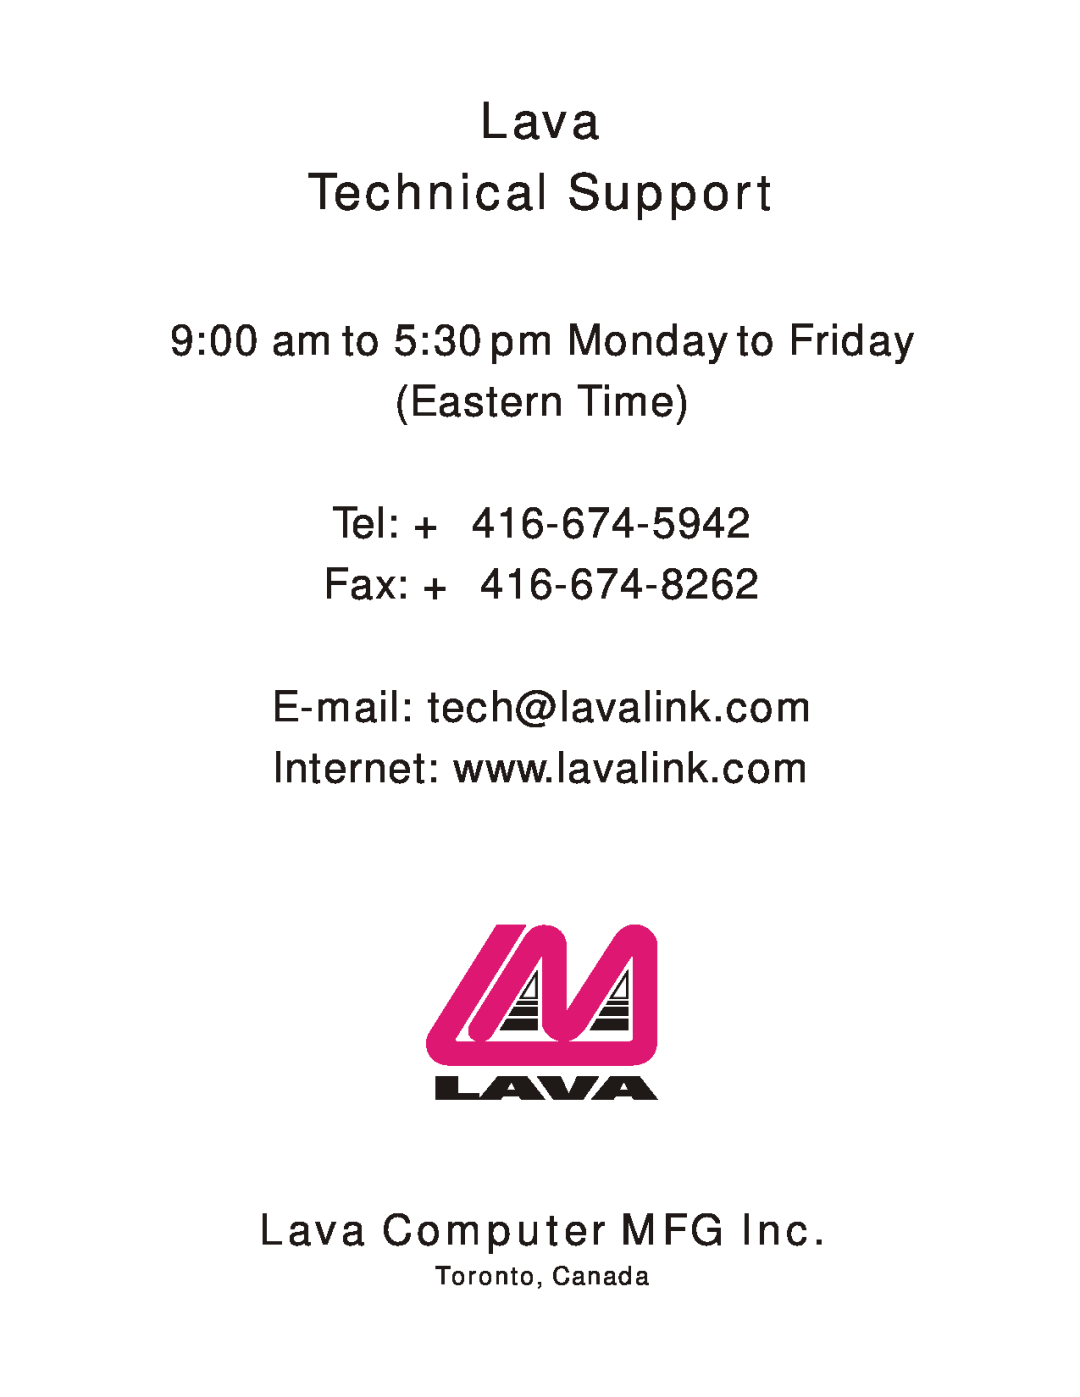 Lava Computer IEEE 1394 Lava Technical Support, am to 530 pm Monday to Friday Eastern Time Tel + Fax +, Toronto, Canada 